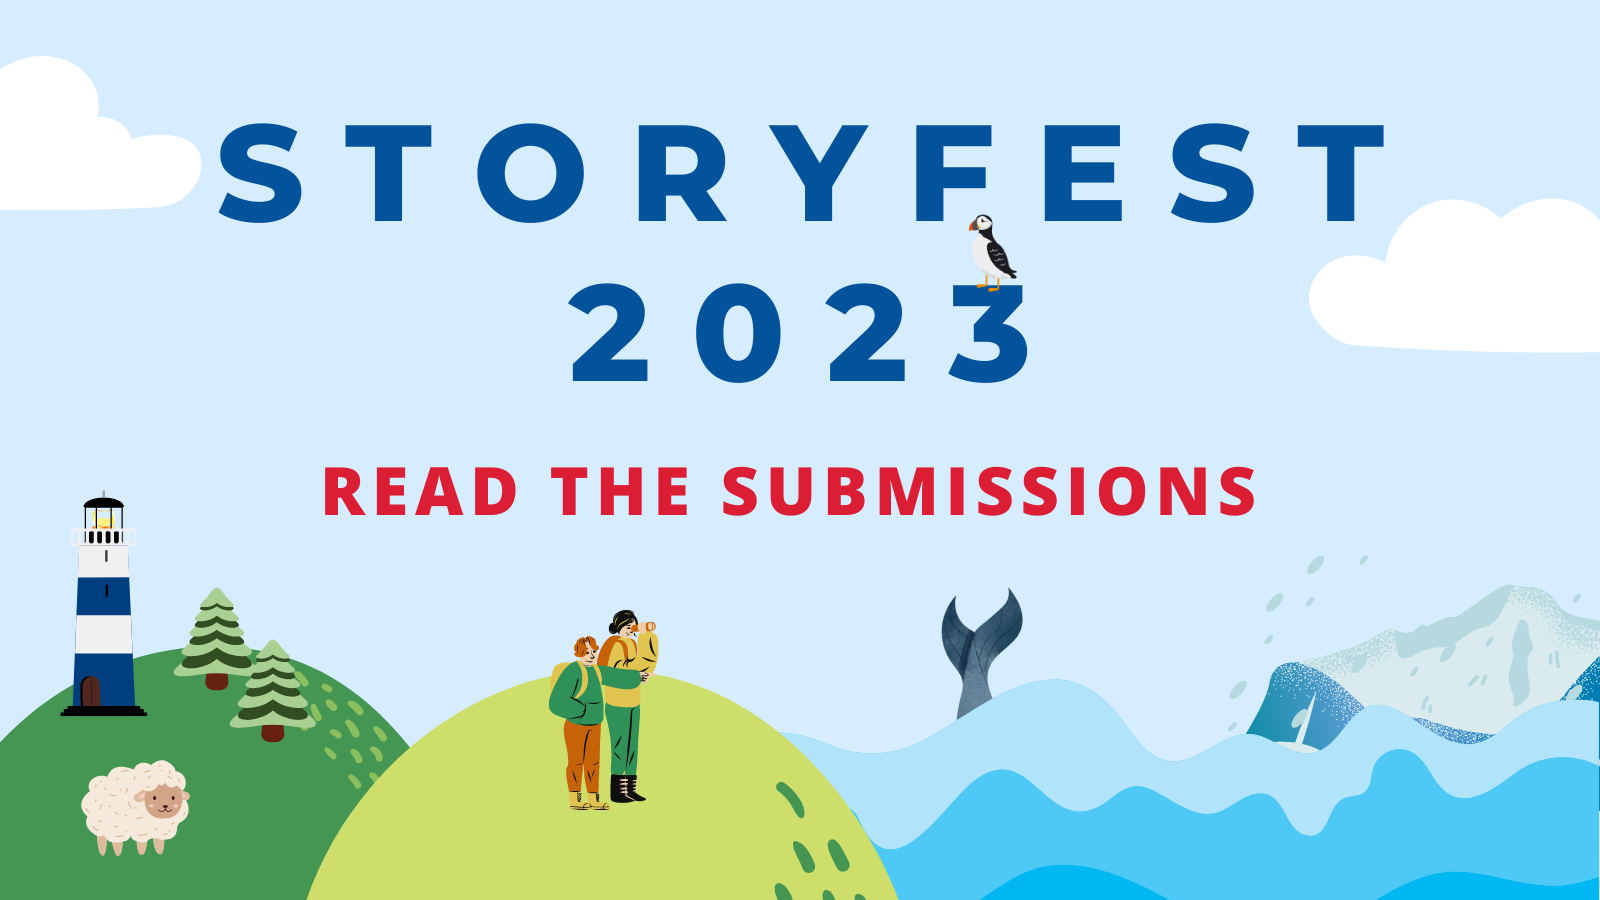 Storyfest: Tell an inspiring story to move the Planet Forward